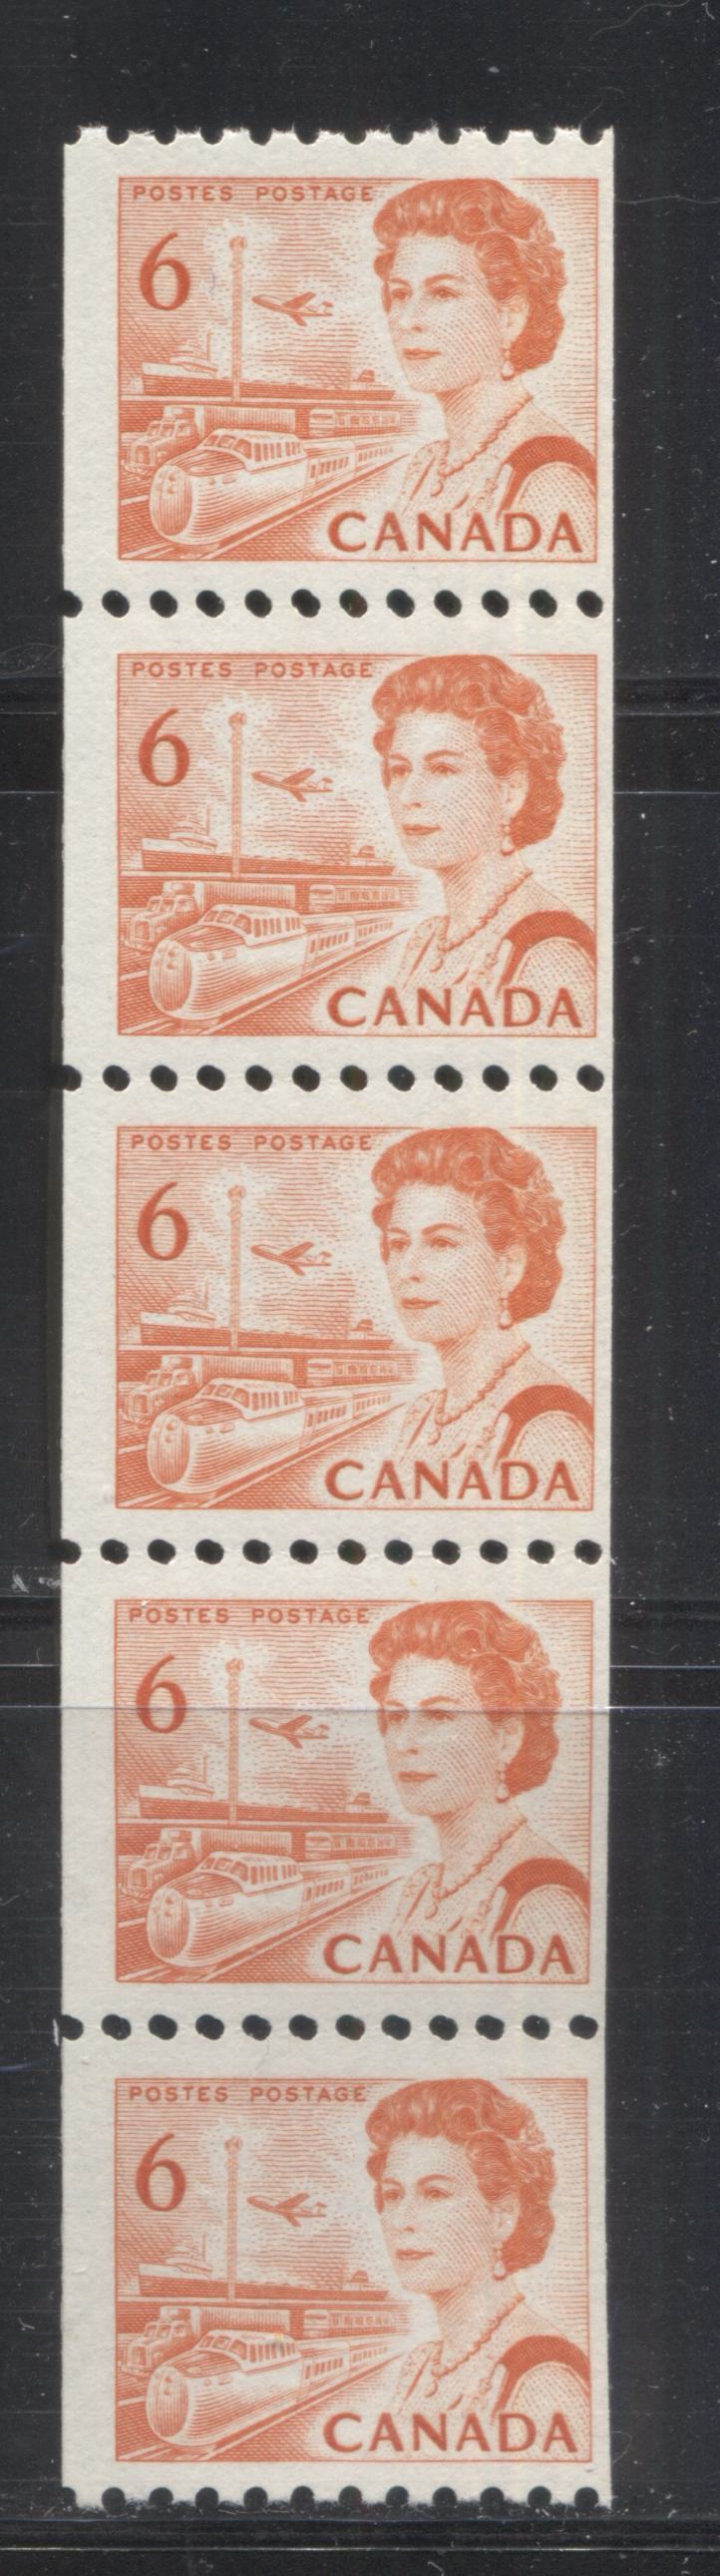 Lot 116 Canada #468A 6c Orange Transportation, 1967-1973 Centennial Definitive Issue, A VFNH Coil Strip Of 5 On DF Grayish Paper With Dex Gum, Double Perfs